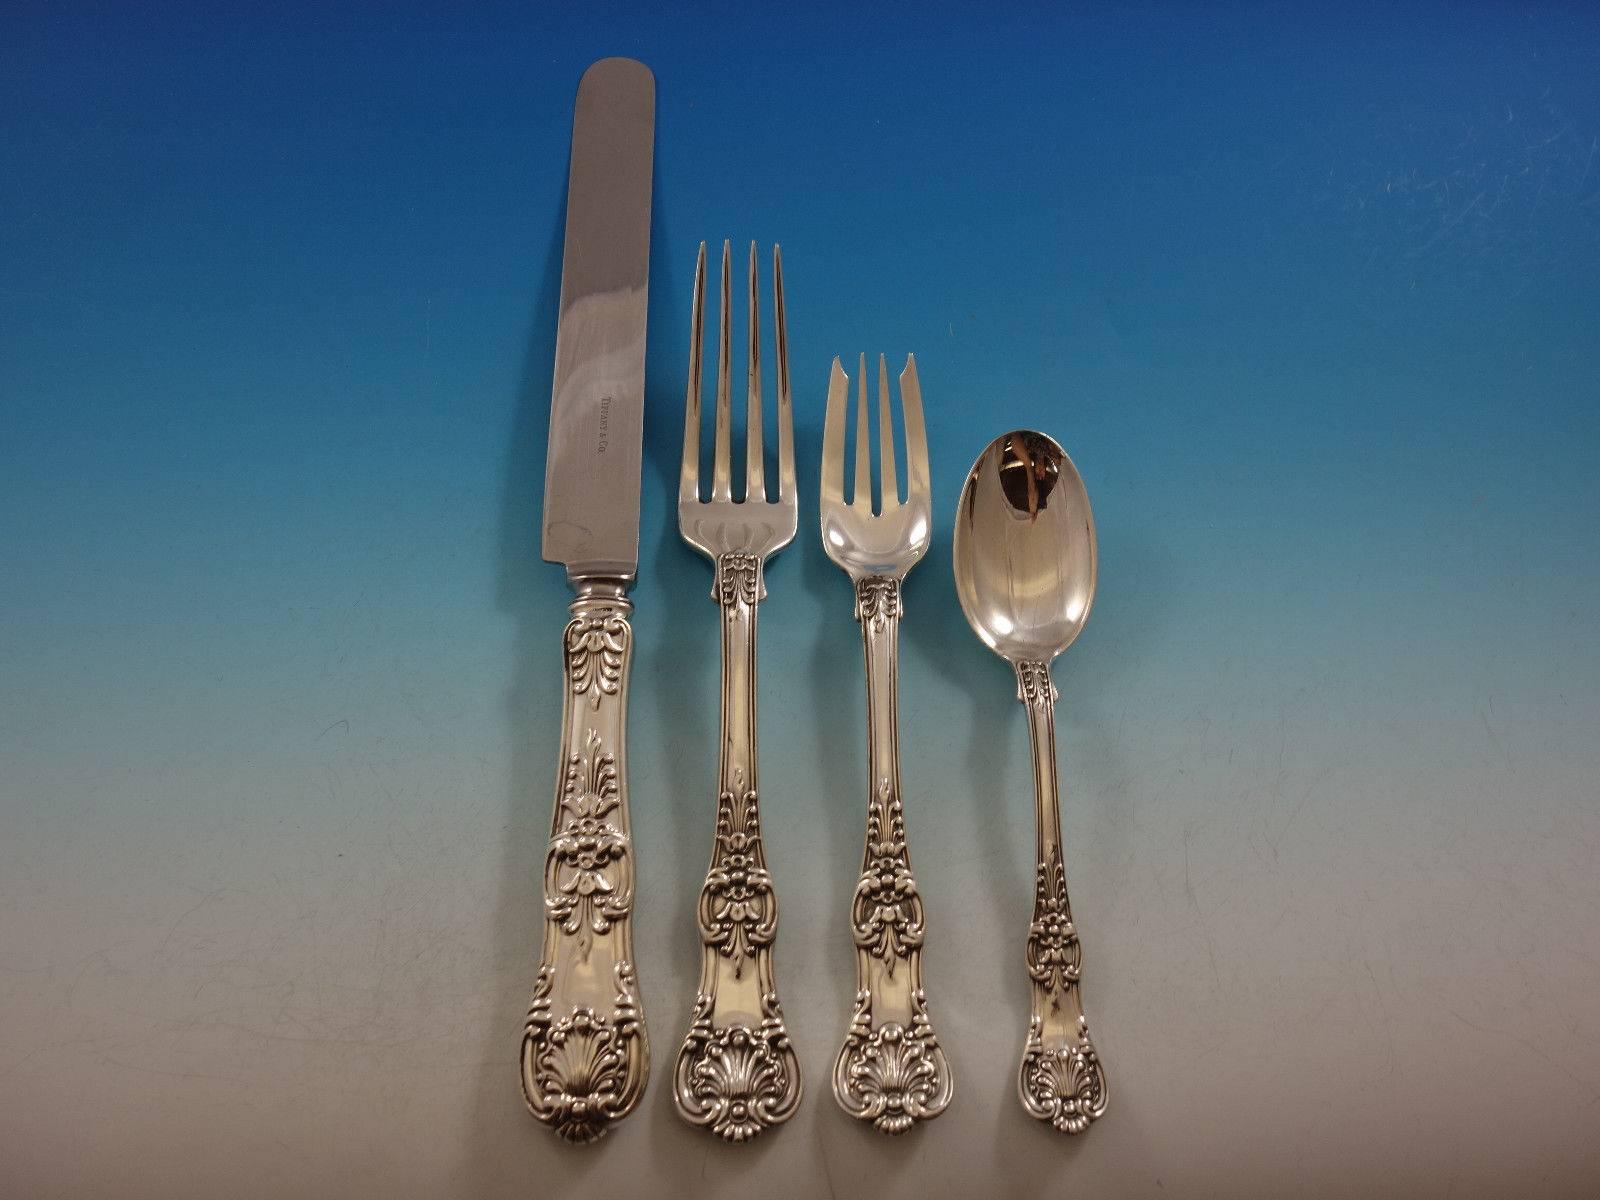 English King by Tiffany & Co. Sterling silver flatware set, 42 pieces. This set includes: six dinner size knives, 10 3/8